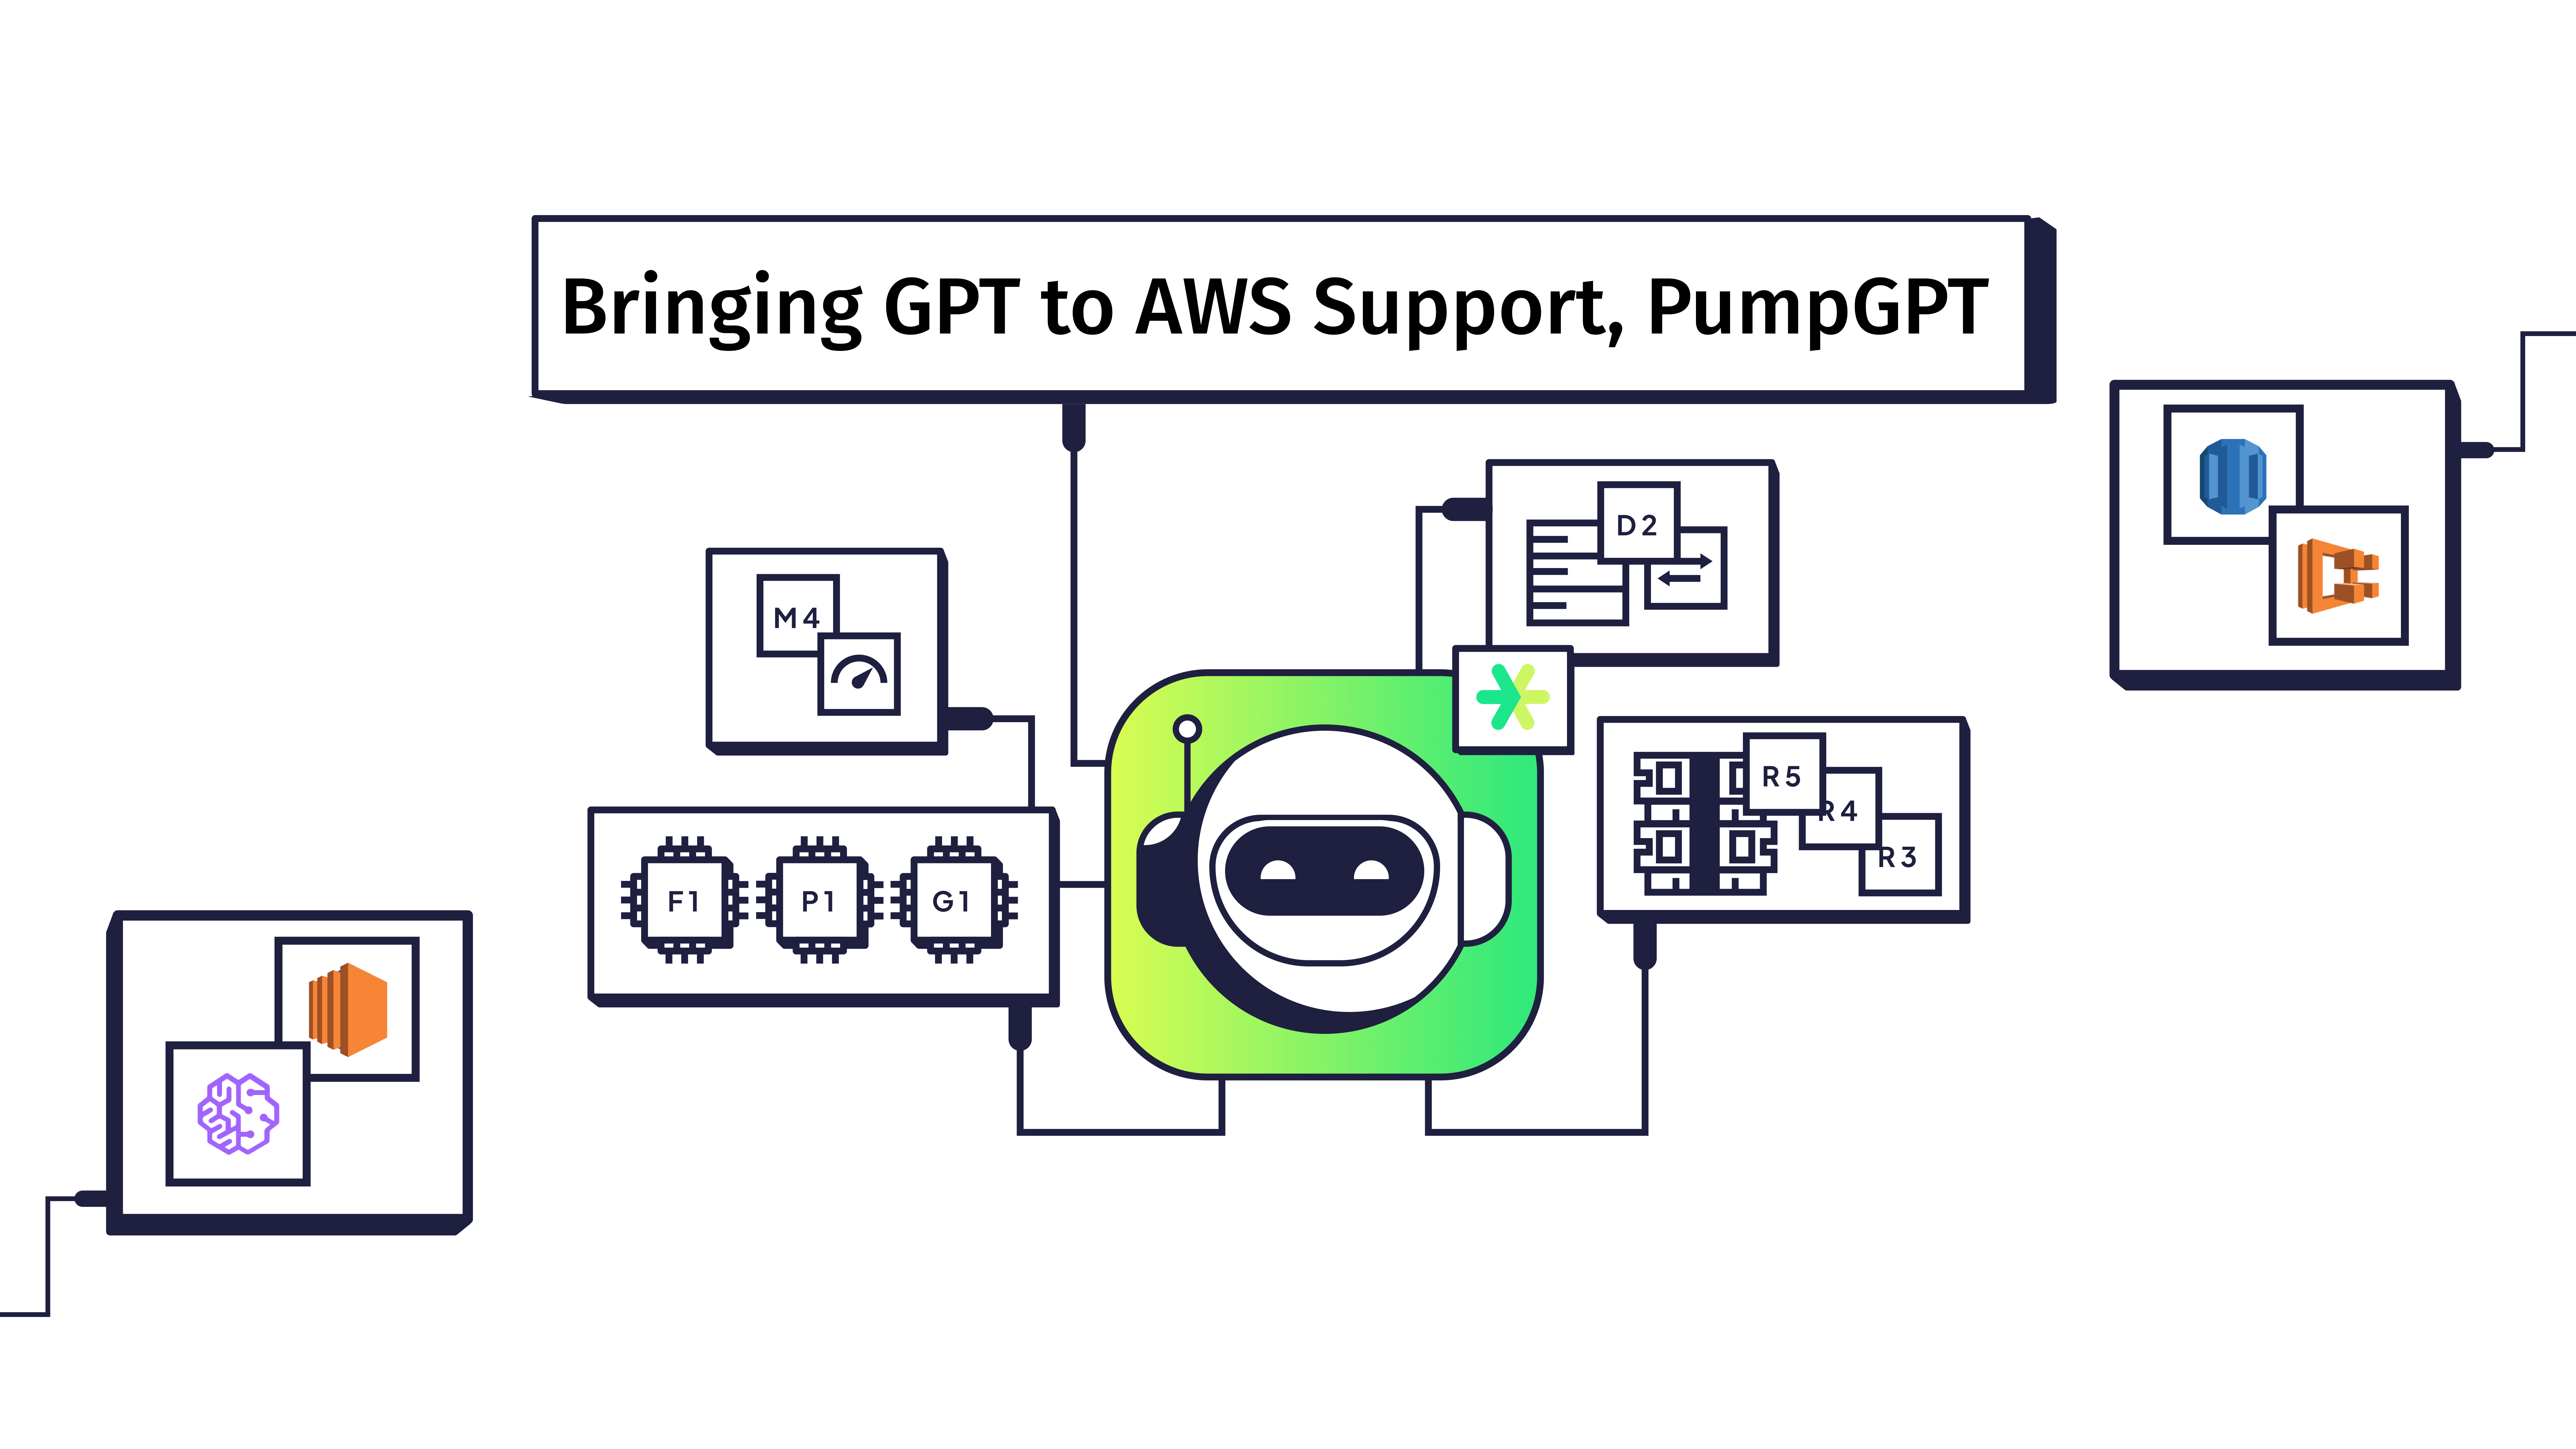 Pump launches PumpGPT is to transform AWS support